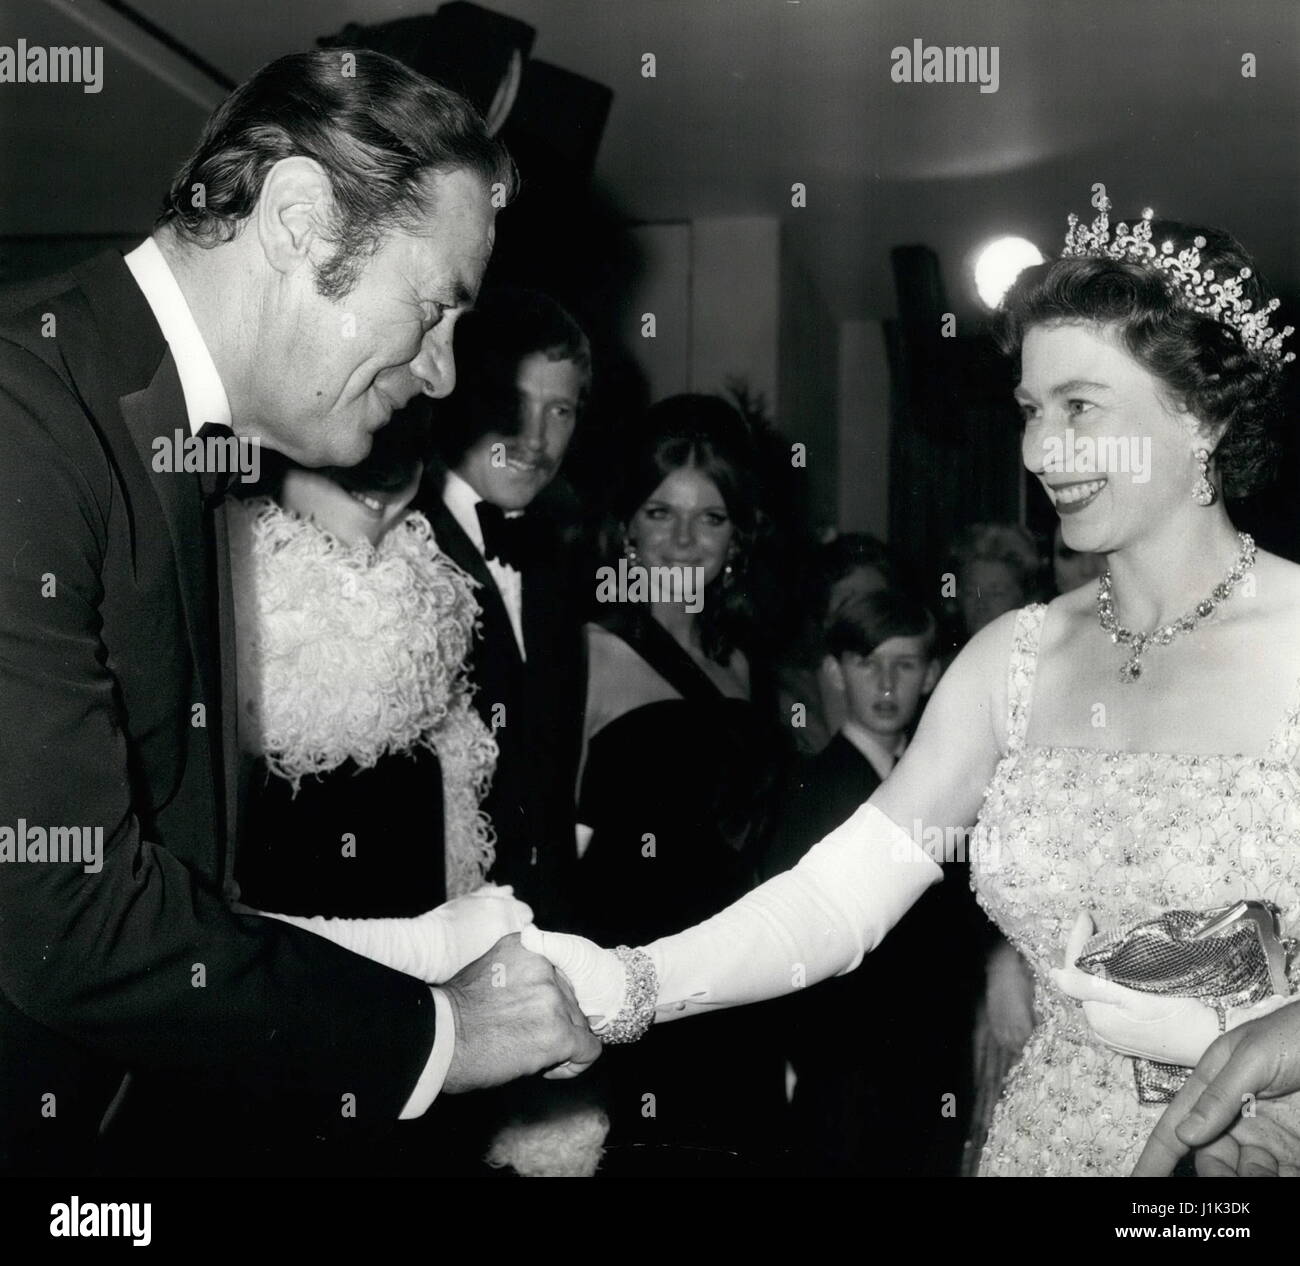 File Photo. 21st Apr, 2017. Britain's QUEEN ELIZABETH, the world's oldest and longest-reigning monarch, celebrates her 91st birthday. Pictured: Dec. 12, 1967 - The Queen meets the stars. : Queen Elizabeth II is introduced it actor Rex Harrison, star of the film ''Doctor Dolittle'' when she attended the premiere showing of the film at the Odeon Cinema, London, last night. The all-ticket showing was in aid of the British Empire Cancer Campaign Charity. (Credit Image: © Keystone Press Agency/Keystone USA via ZUMAPRESS.com) Stock Photo